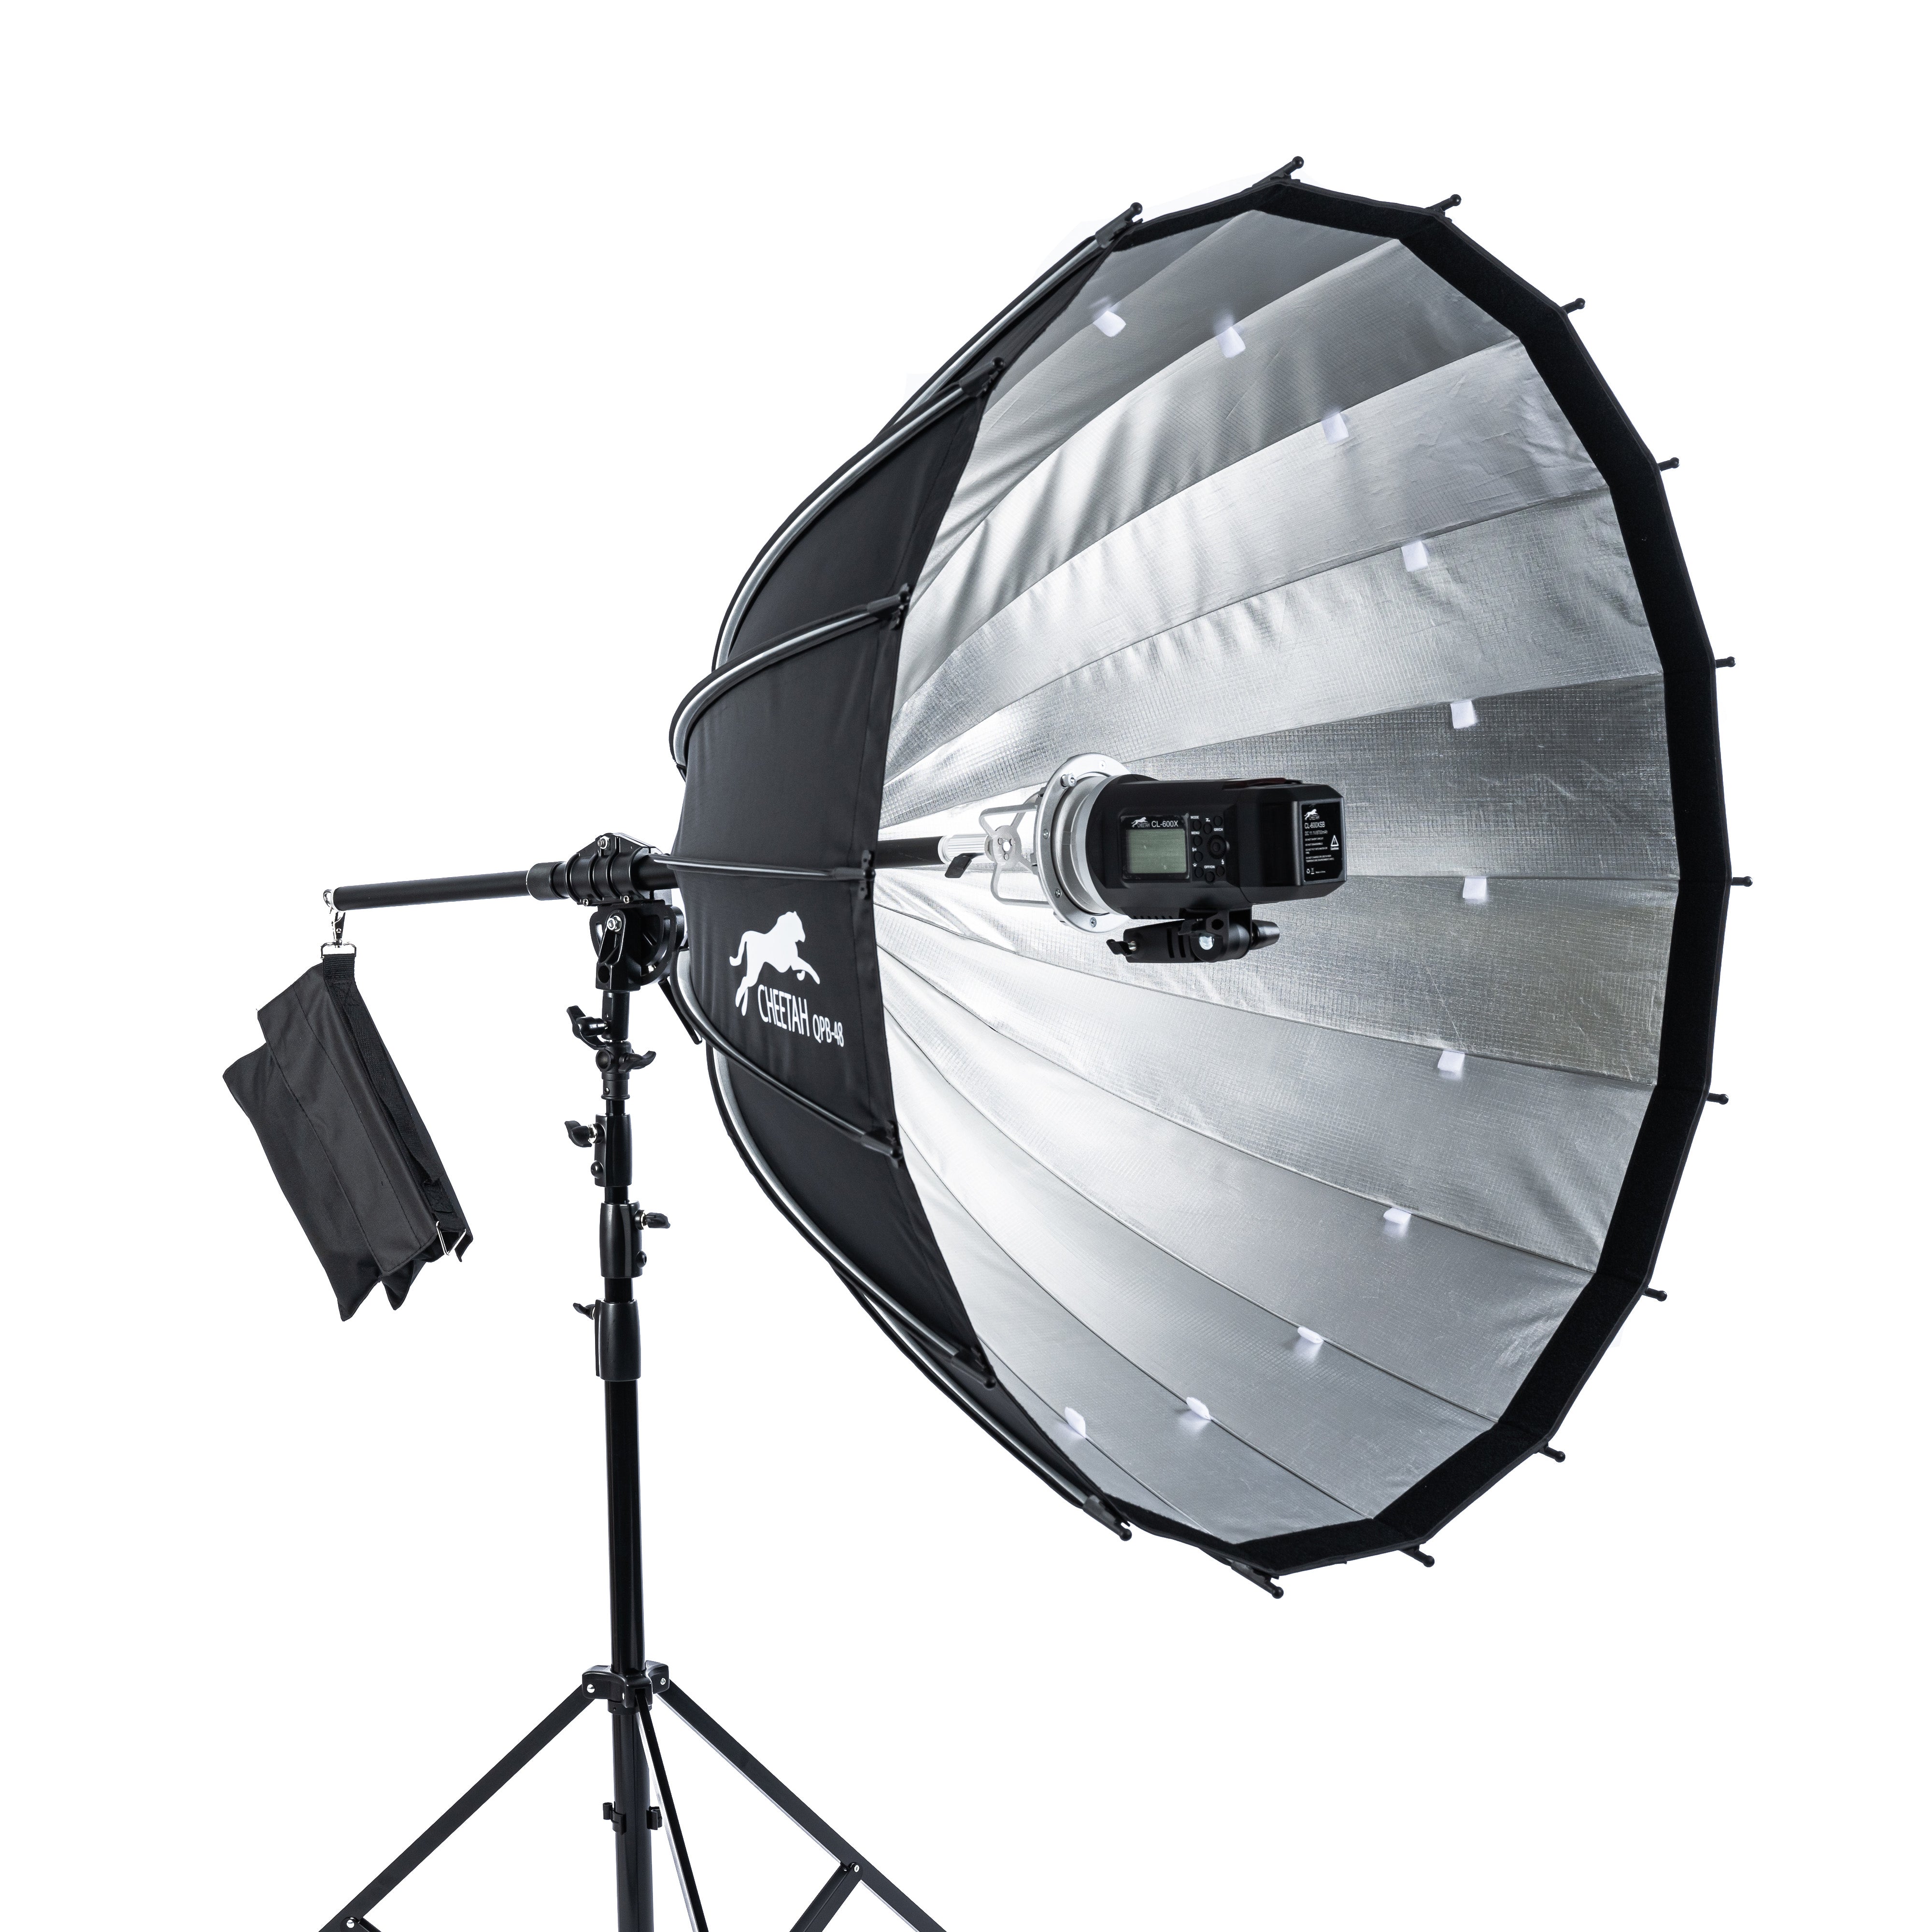 QPB-48 with Focusing System Softbox – Cheetah Stand